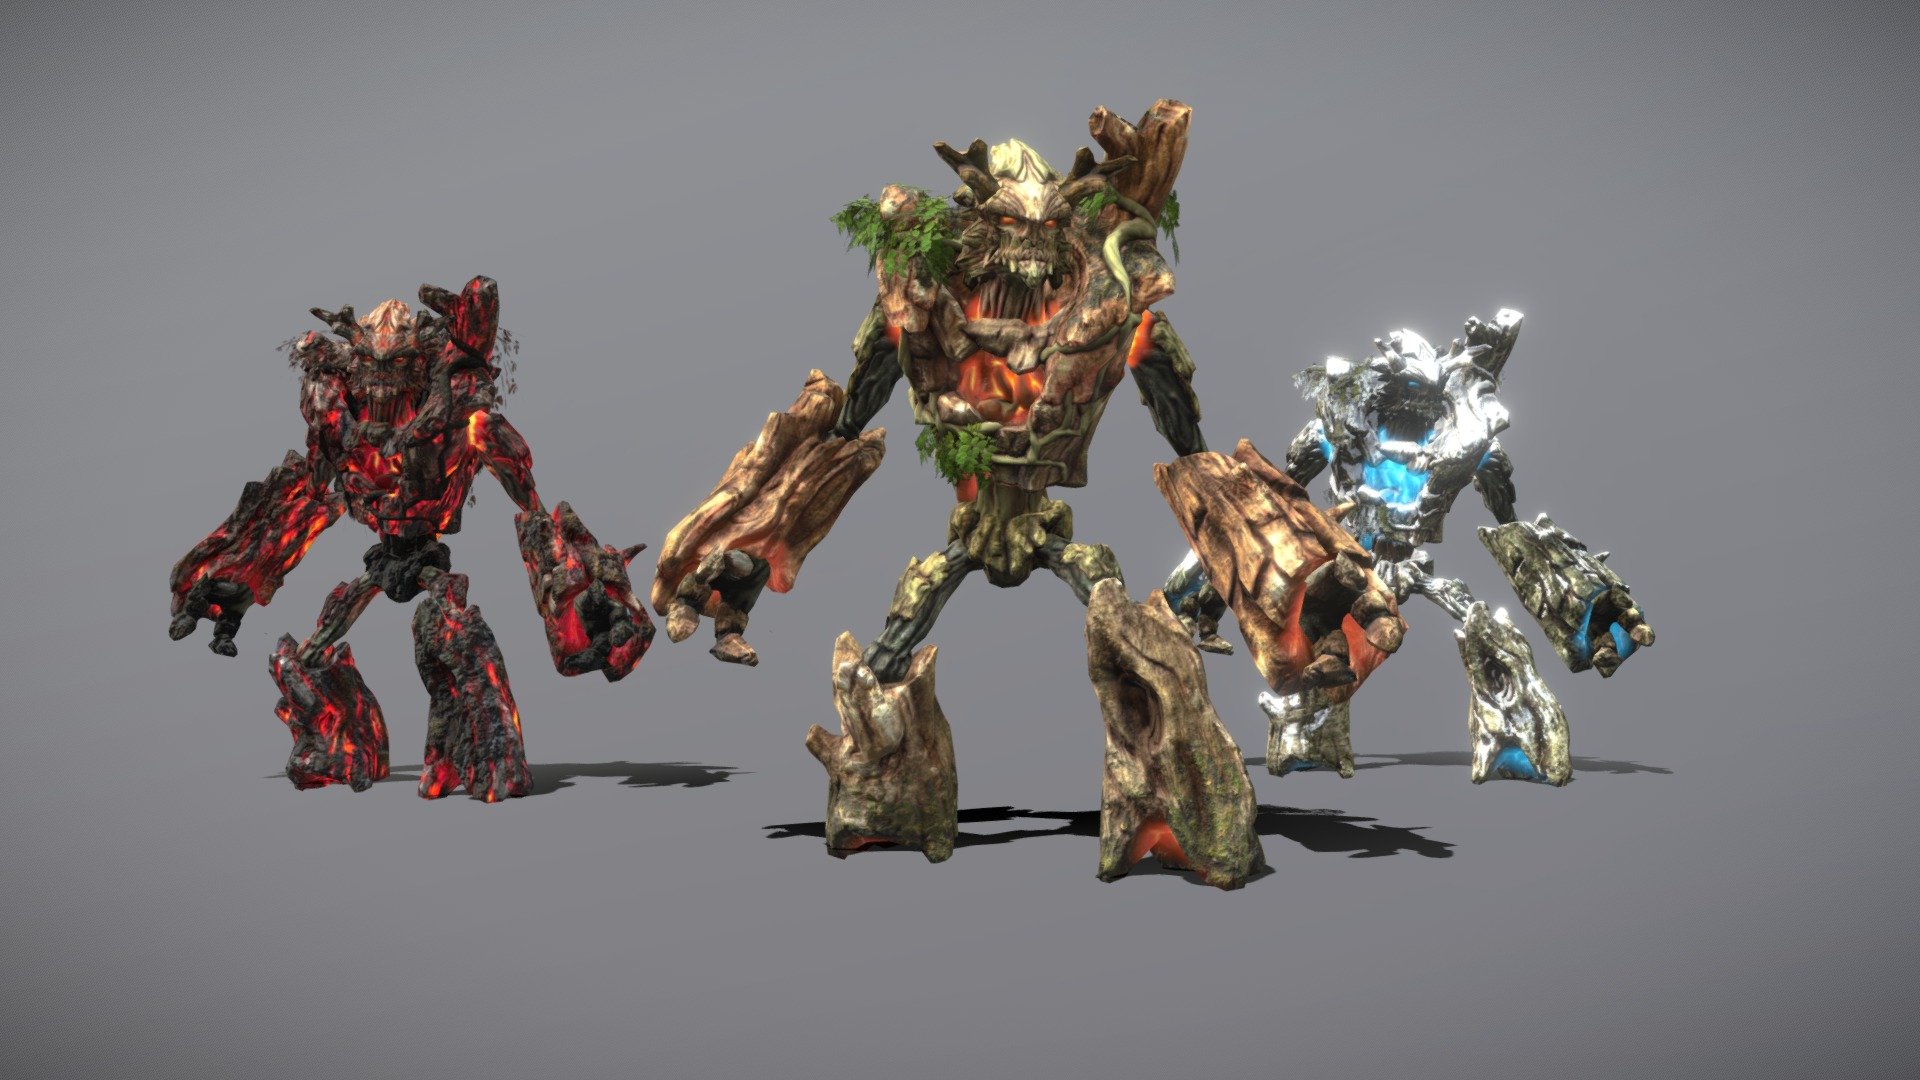 Forest Golems #2 to Populate your fantasy world.

It is part of a Pack of 4 Forset Golems Ready to be used on any Game Engine (Unity, Unreal)


⭐IMPORTANT⭐


The Source files include the Entire Forest Collection so you need to buy it one



Check the Full Forest Golem Colection:
https://sketchfab.com/malbers.shark87/collections/forest-golems-by-malbers



If you need the Unreal and Unity Projects please write to me: malbers.shark87@gmail.com


ADDITIONAL LICENSE

The following custom license applies to this asset in addition to the EULA.

END USER will be prohibited from using the asset license for the following products:




Creation &amp; Trading of Non-Fungible-Tokens (NFT) and/or use in Blockchain-based projects or products.

Creation of content for Metaverse related and/or Game creation software and products.

3D printing for commercial use.

Remix, transform or build upon the material, and re-sell the modified material.
 - Forest Golems 04 - 3D model by Malbers Animations (@malbers.shark87) 3d model